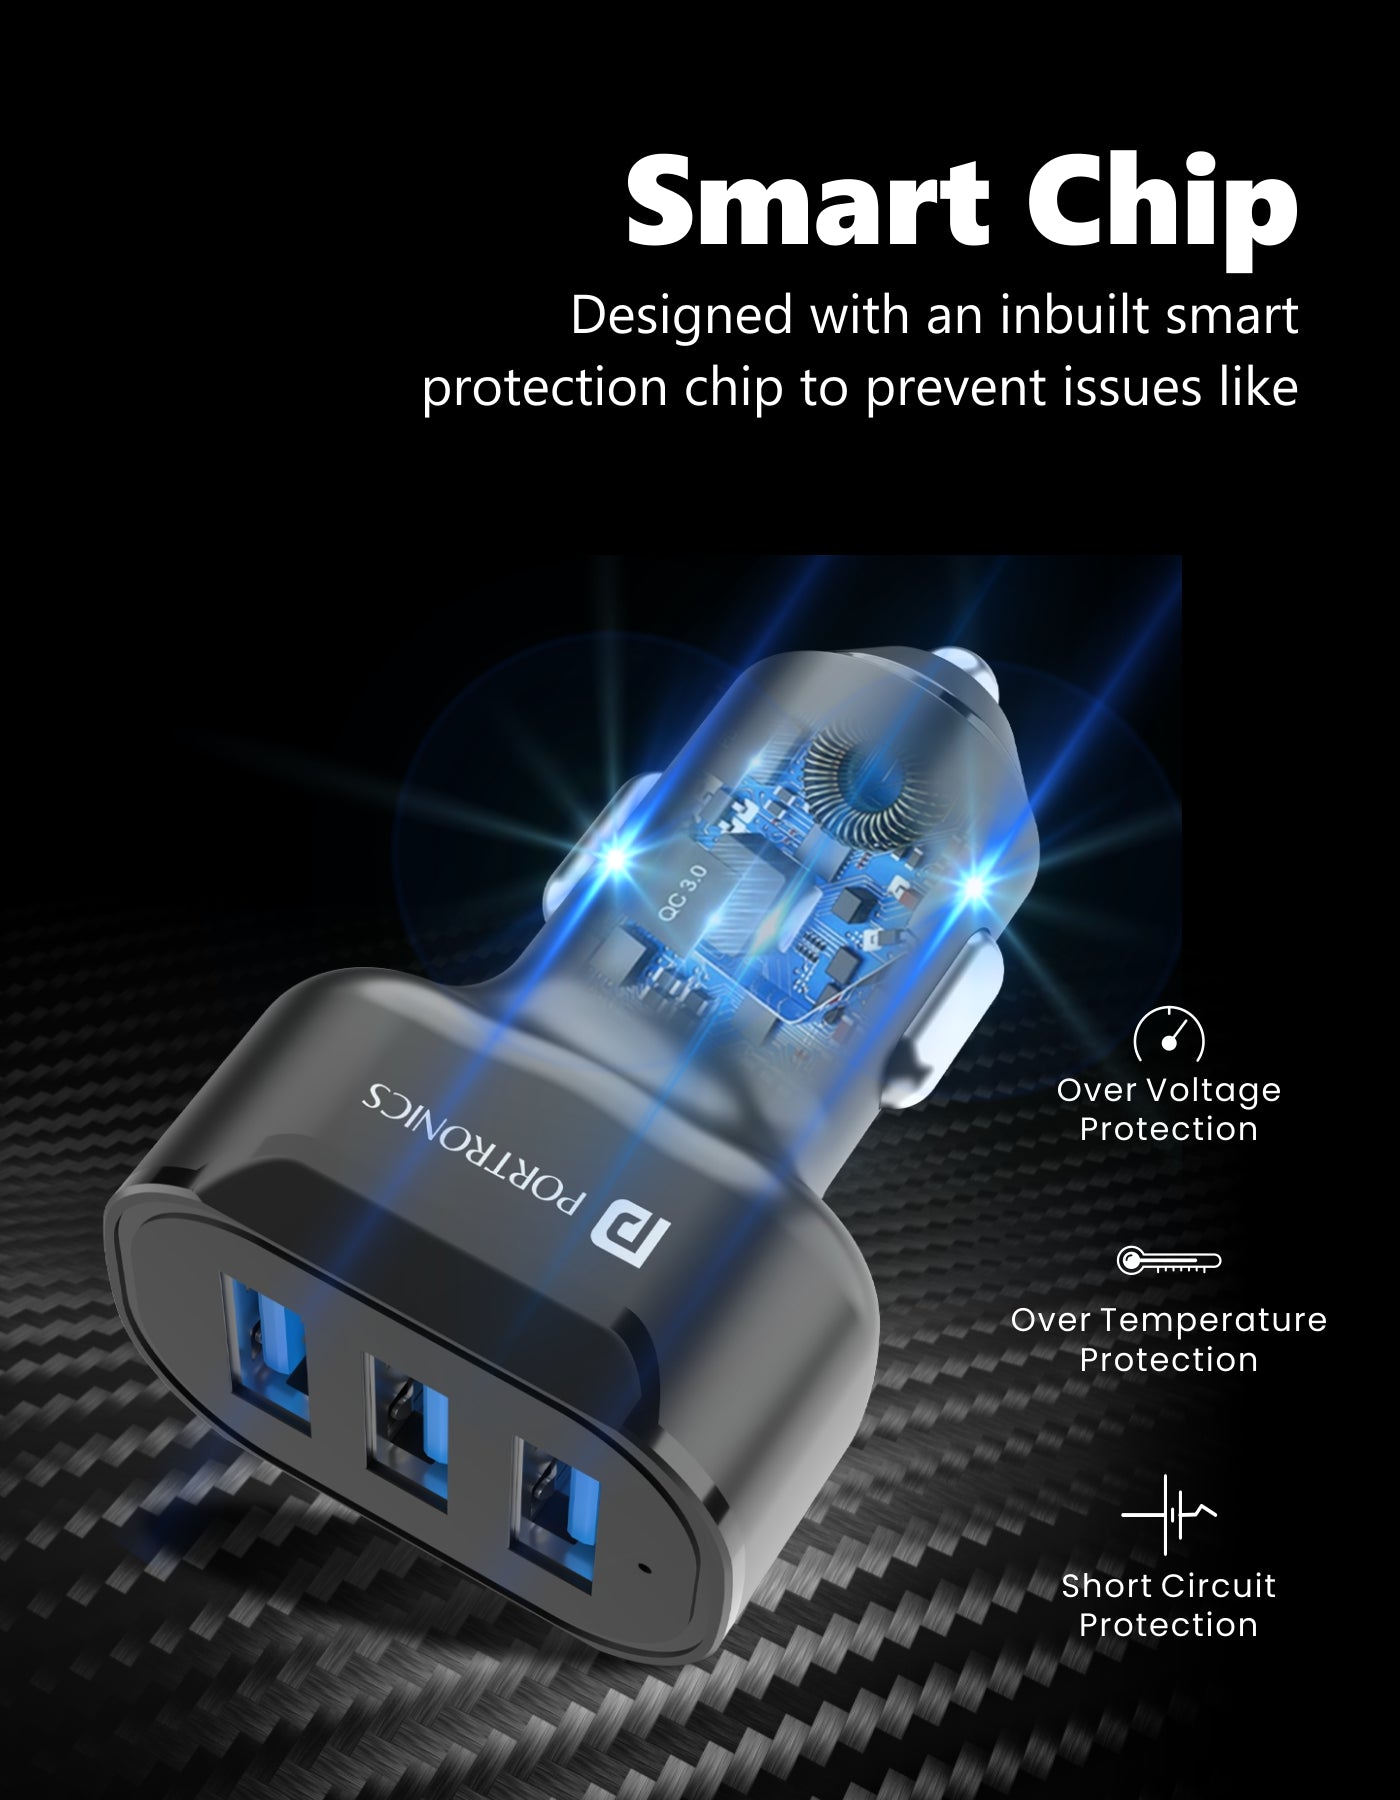 Portronics Car Power 11 car charger with 3 USB ports Designed with an inbuilt smart protection chip to prevent issues